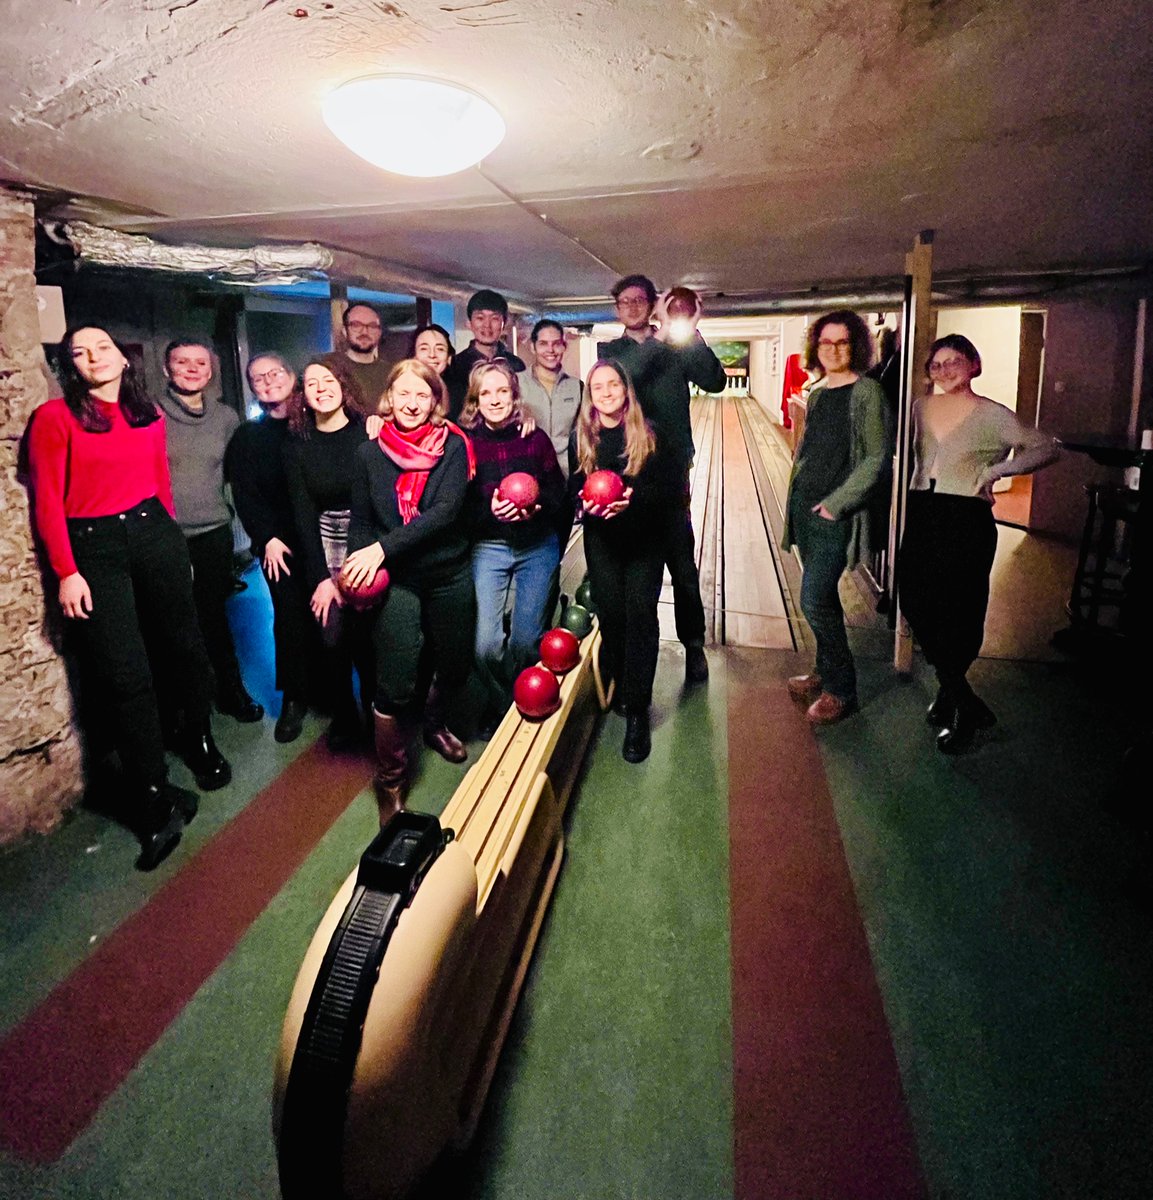 What better way to kick off the new year than with a few rounds of old-school bowling and this beautiful crew?! 🎳 @DYNAMICS_PhD @thehertieschool @HumboldtUni